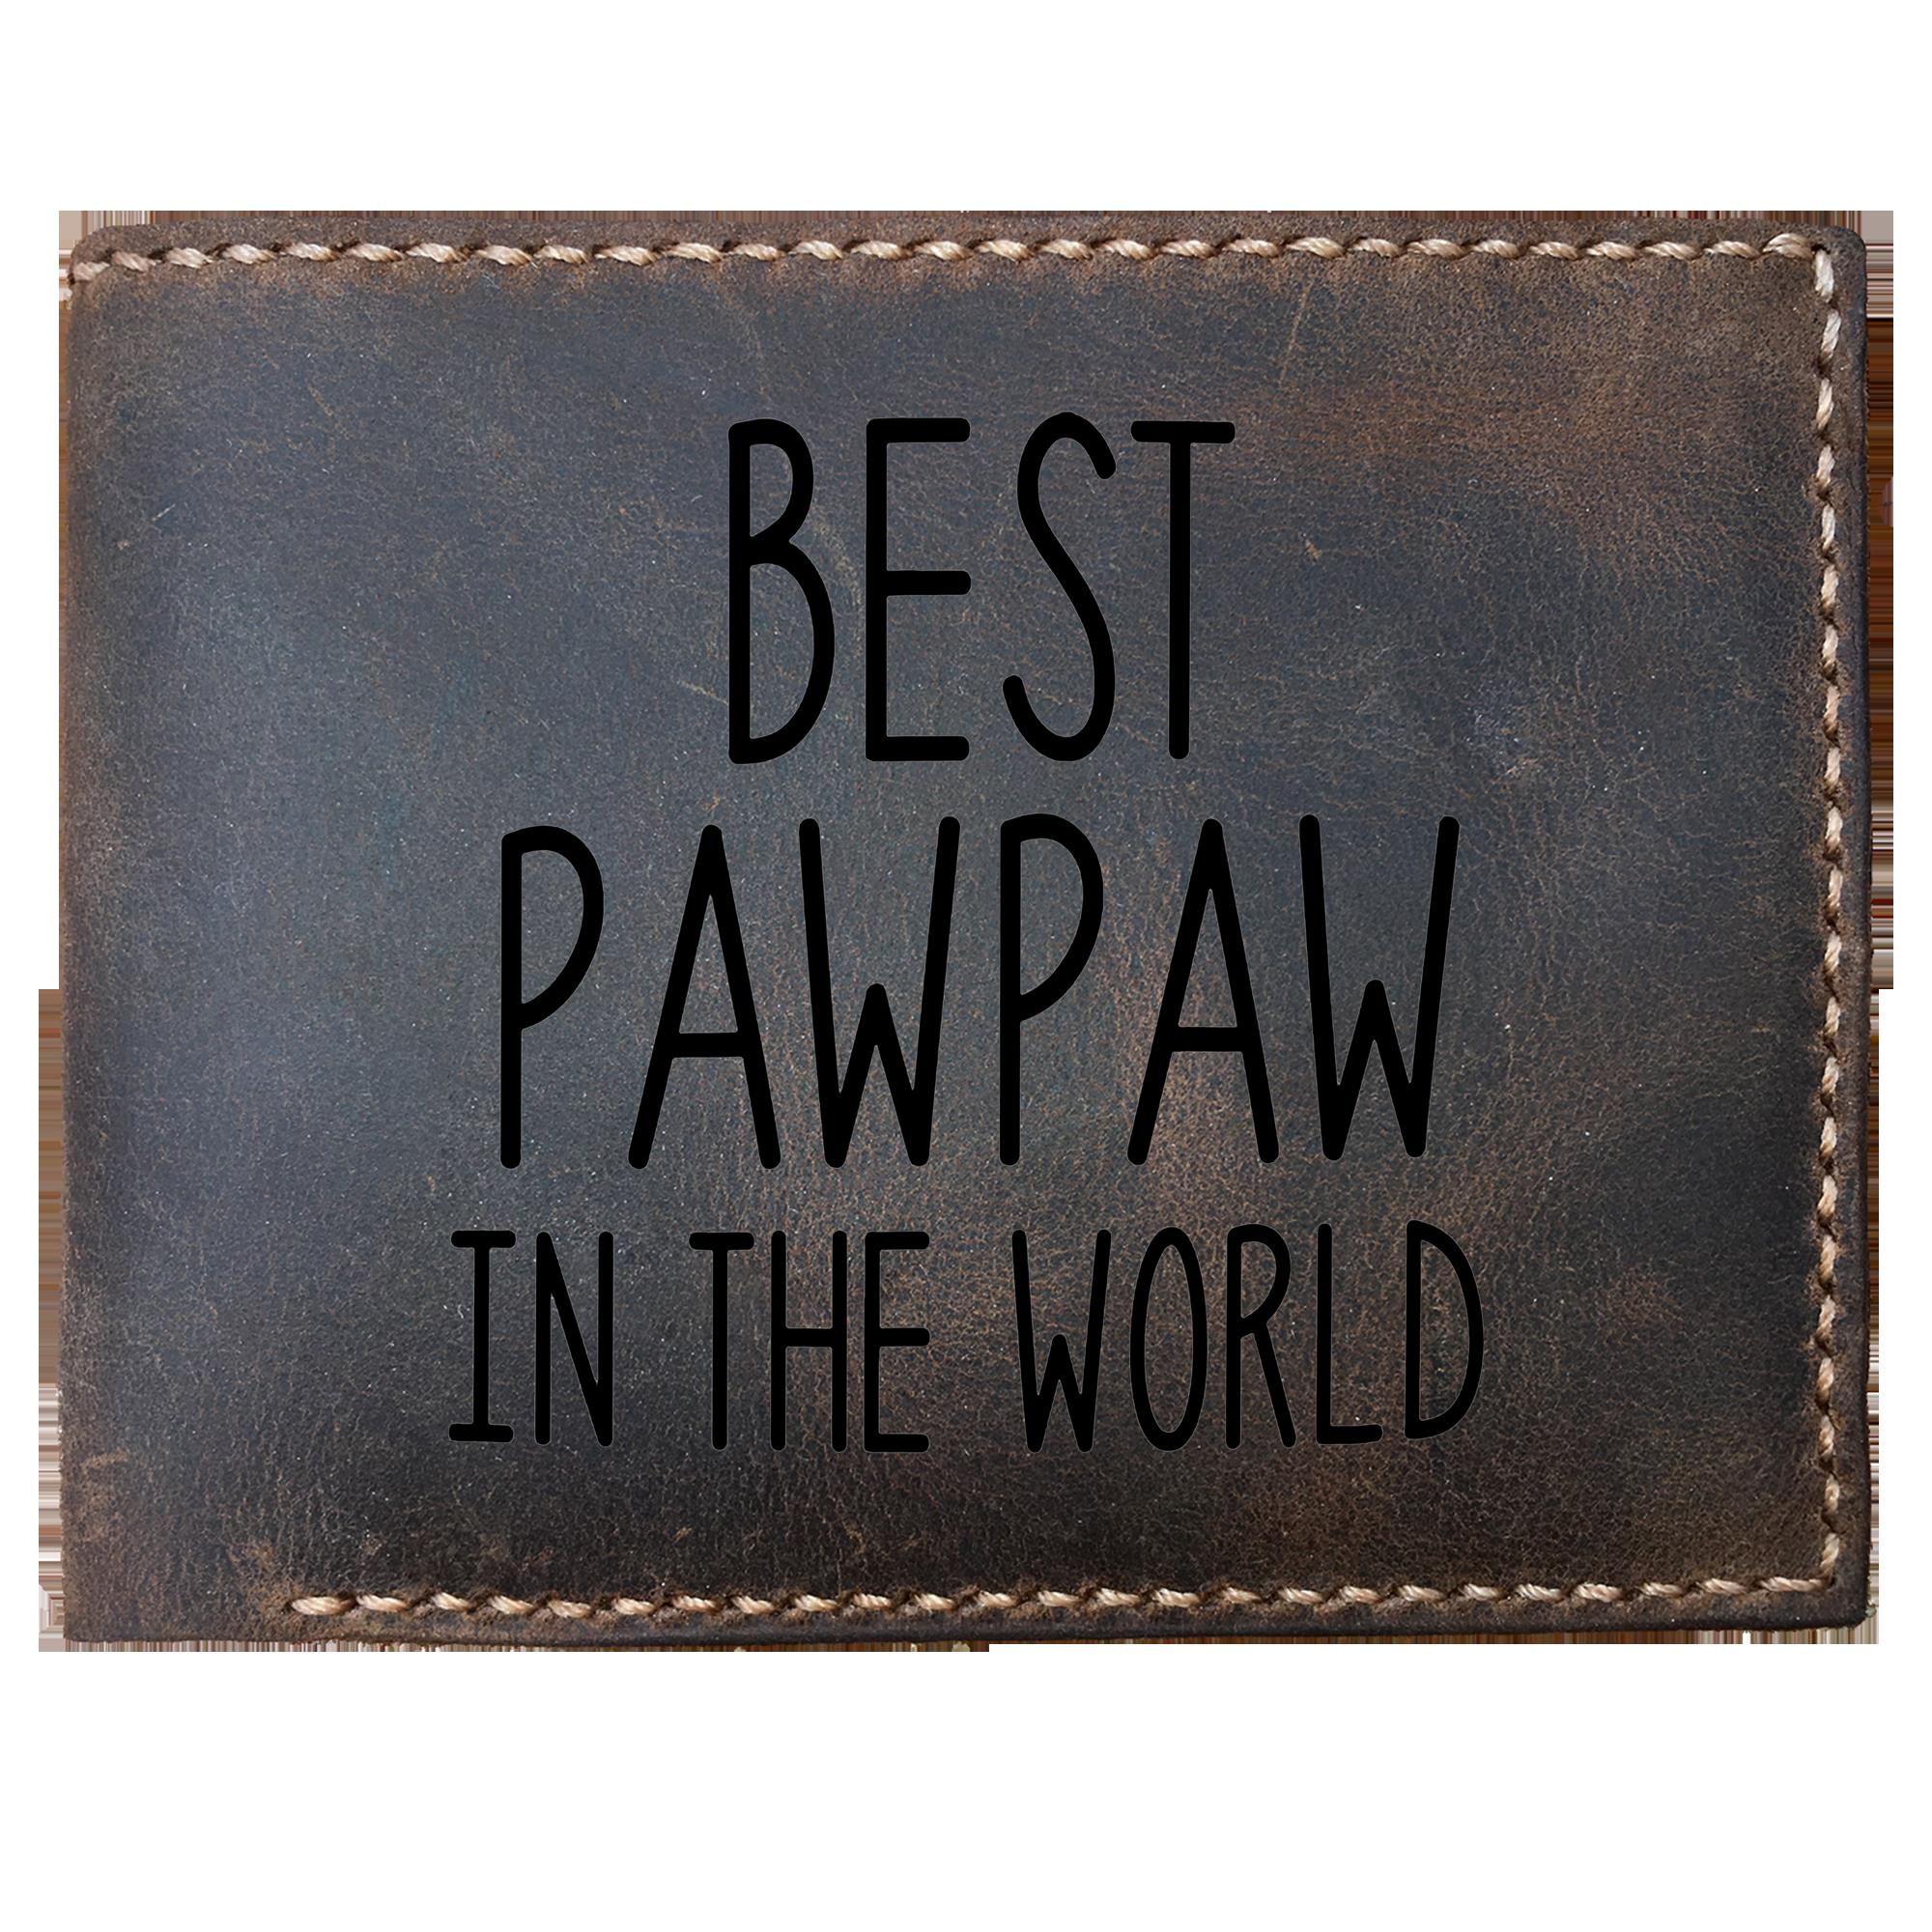 Skitongifts Funny Custom Laser Engraved Bifold Leather Wallet For Men, Pawpaw Idea From Grandchildren Best Pawpaw In The World